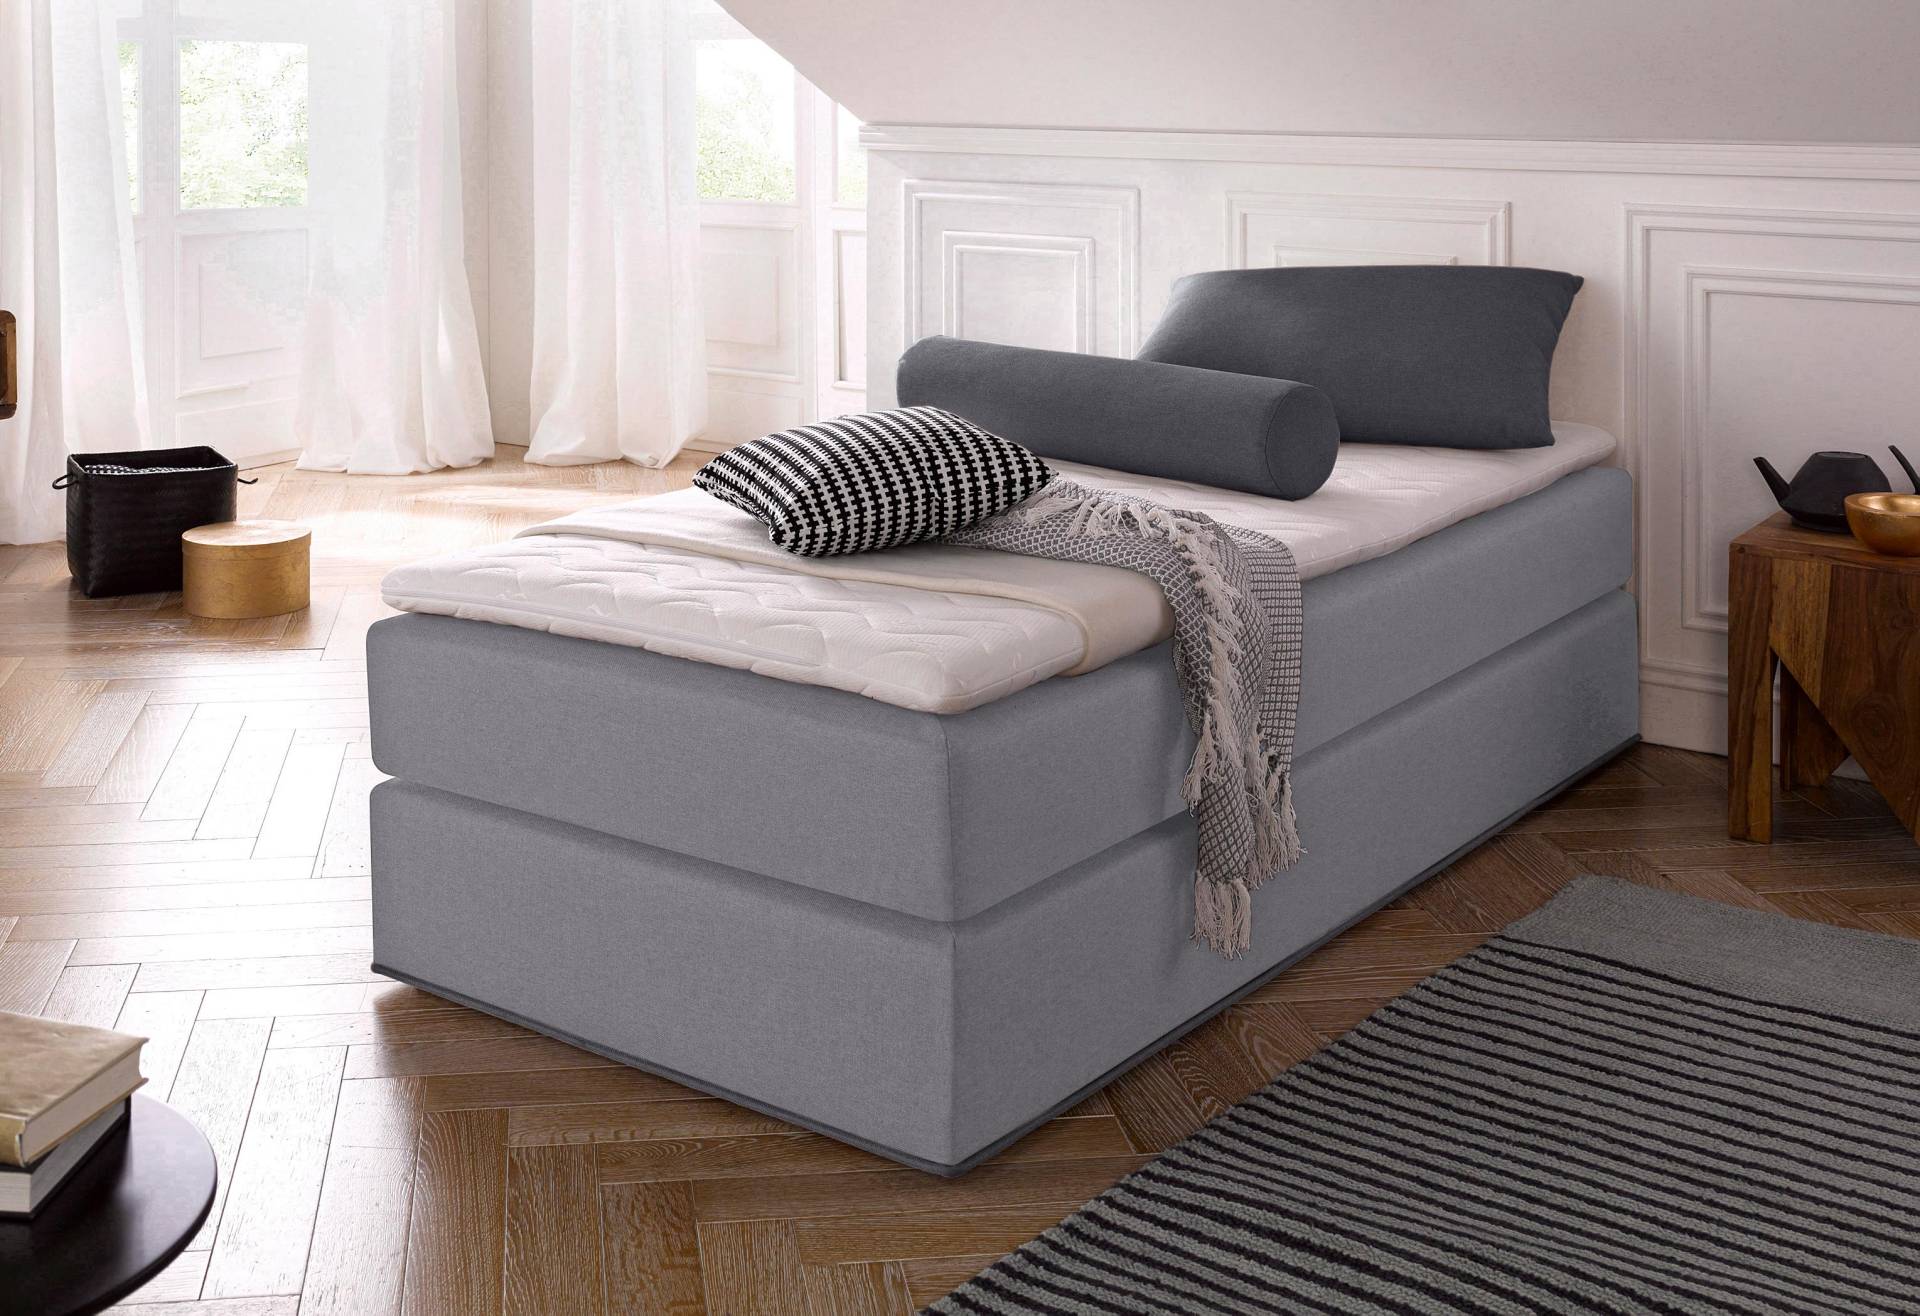 COLLECTION AB Boxspringbett, inklusive Topper von COLLECTION AB